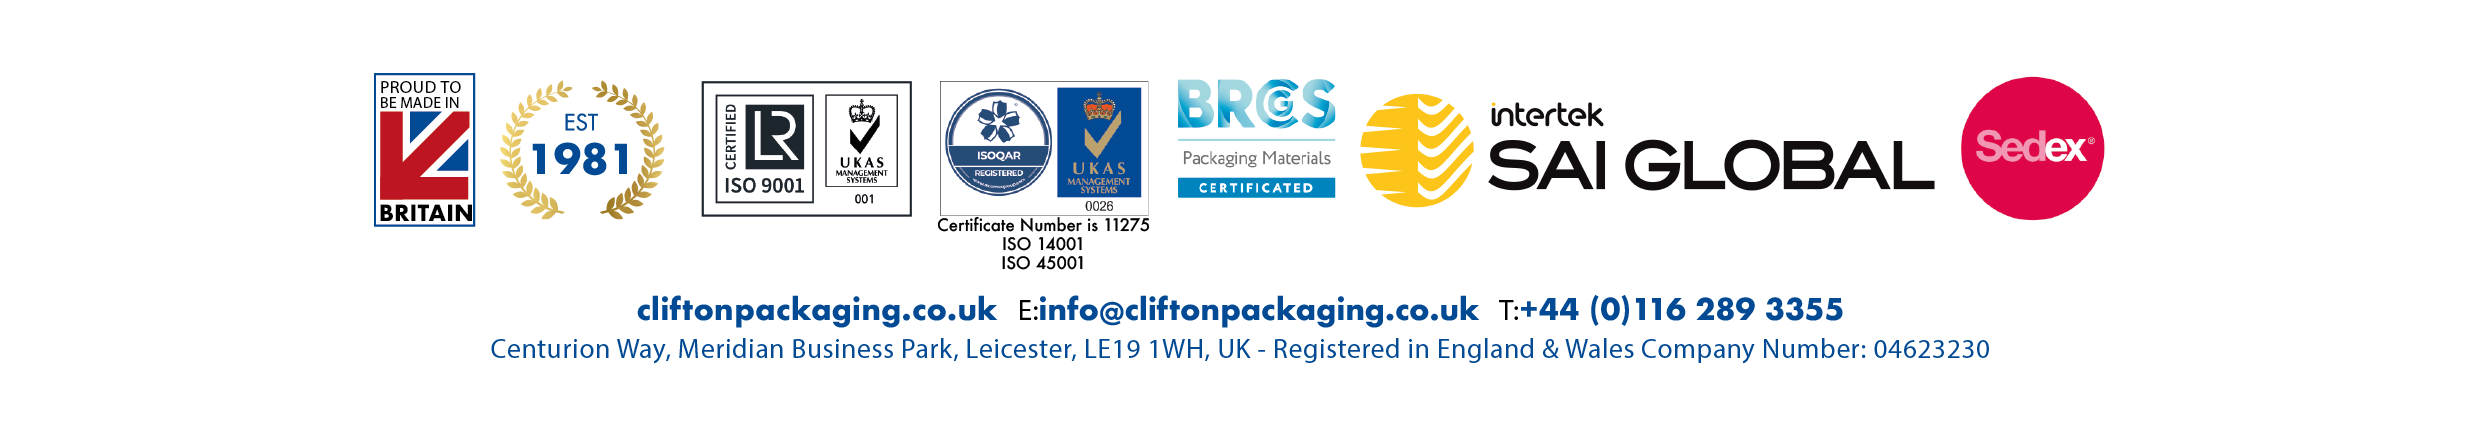 Accreditation, Clifton Packaging Group LTD, packaging, flexible packaging, pouches, stand up pouches 